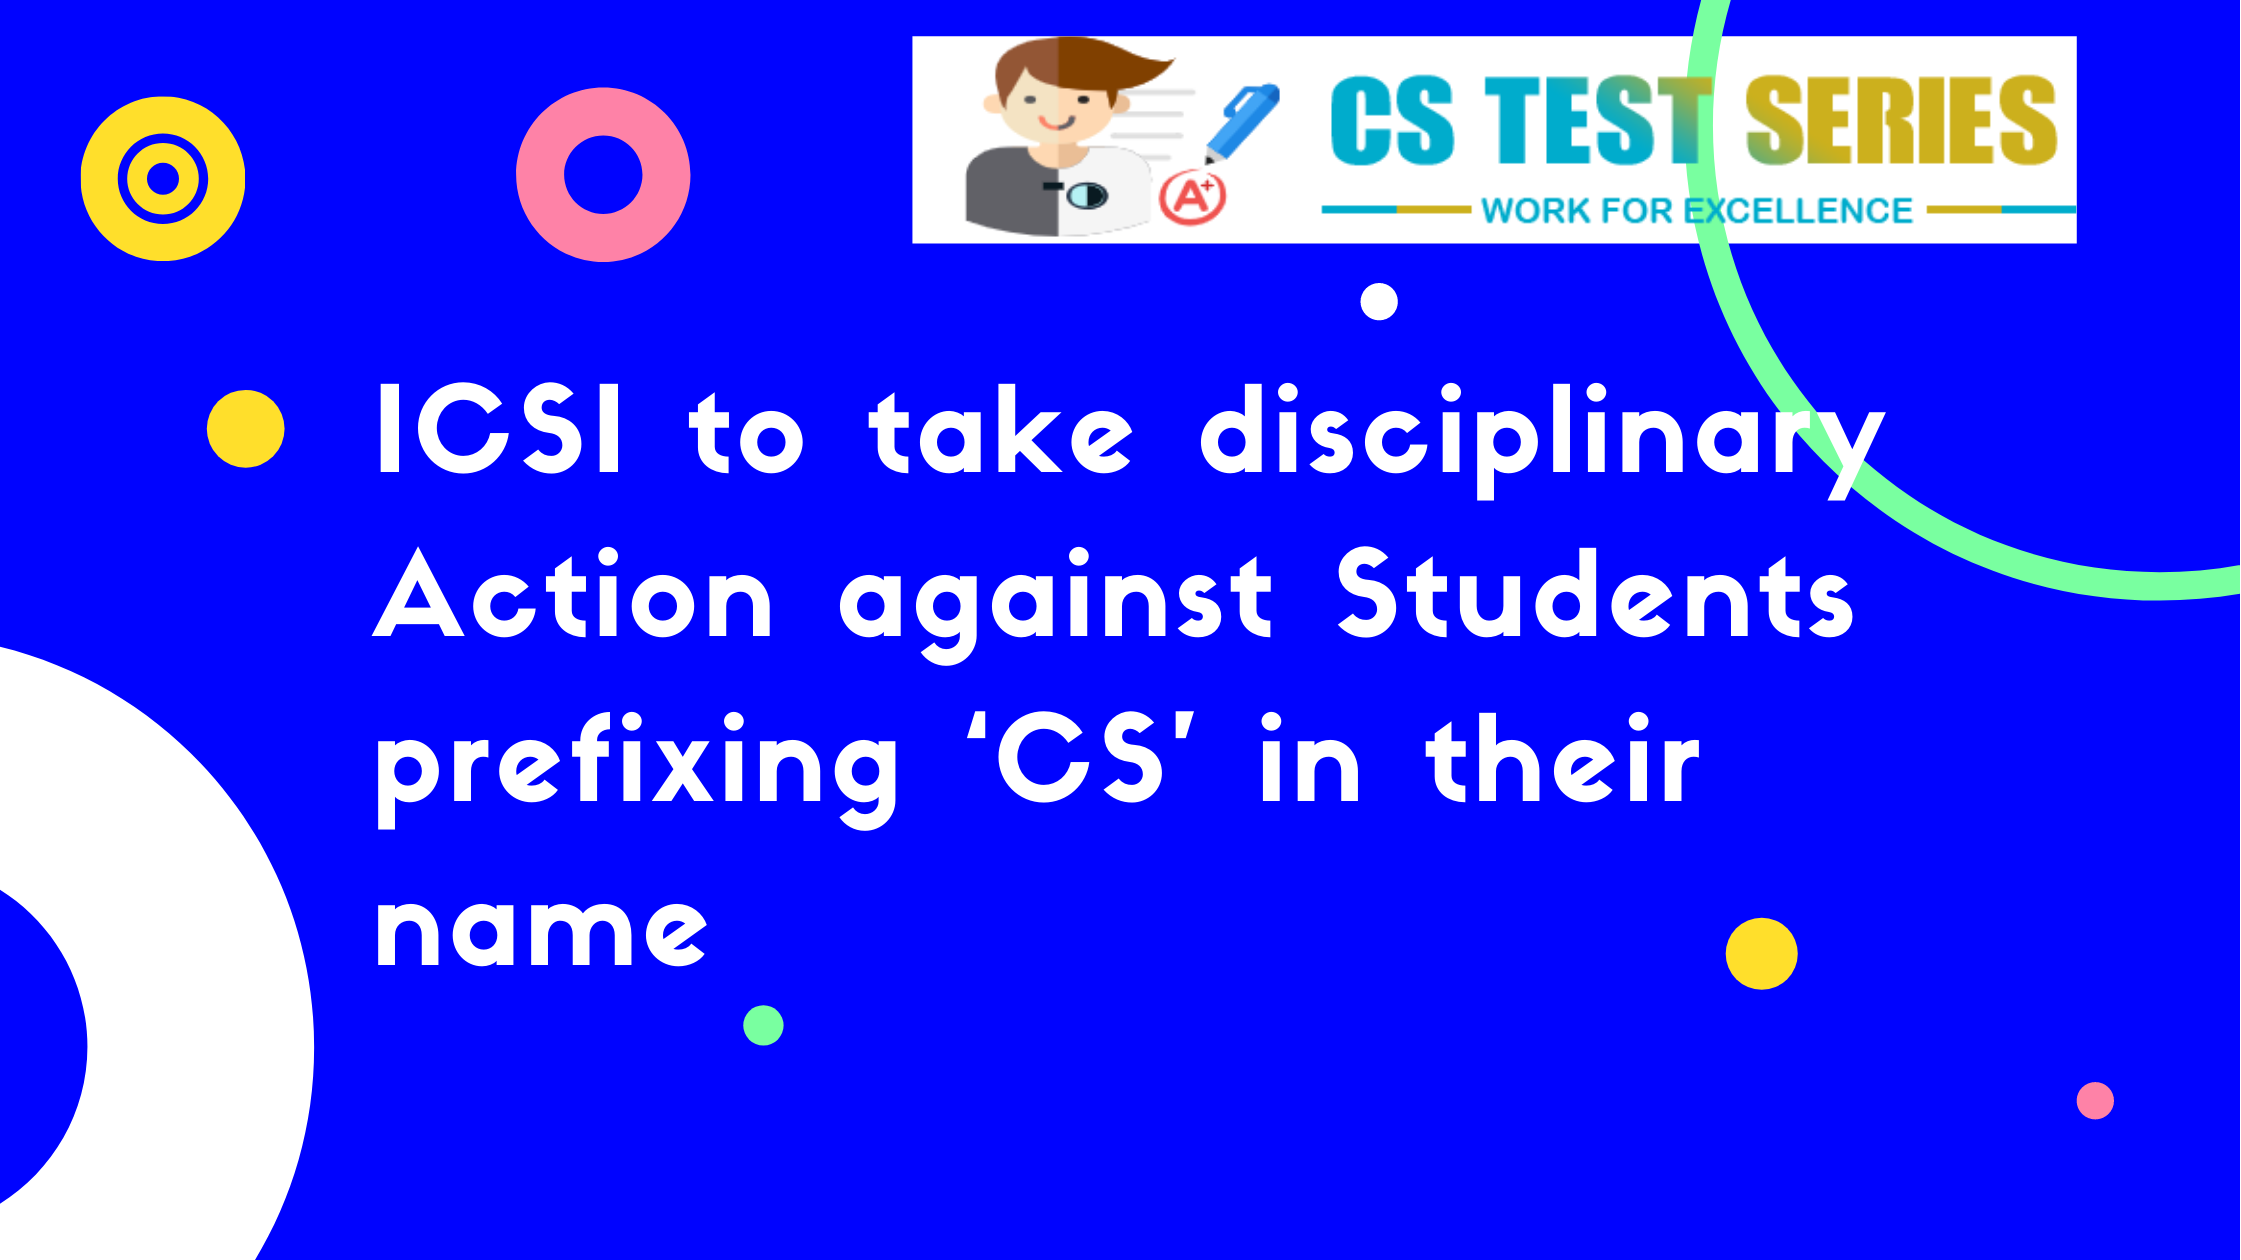 ICSI to take disciplinary Action against Students prefixing ‘CS’ in their name